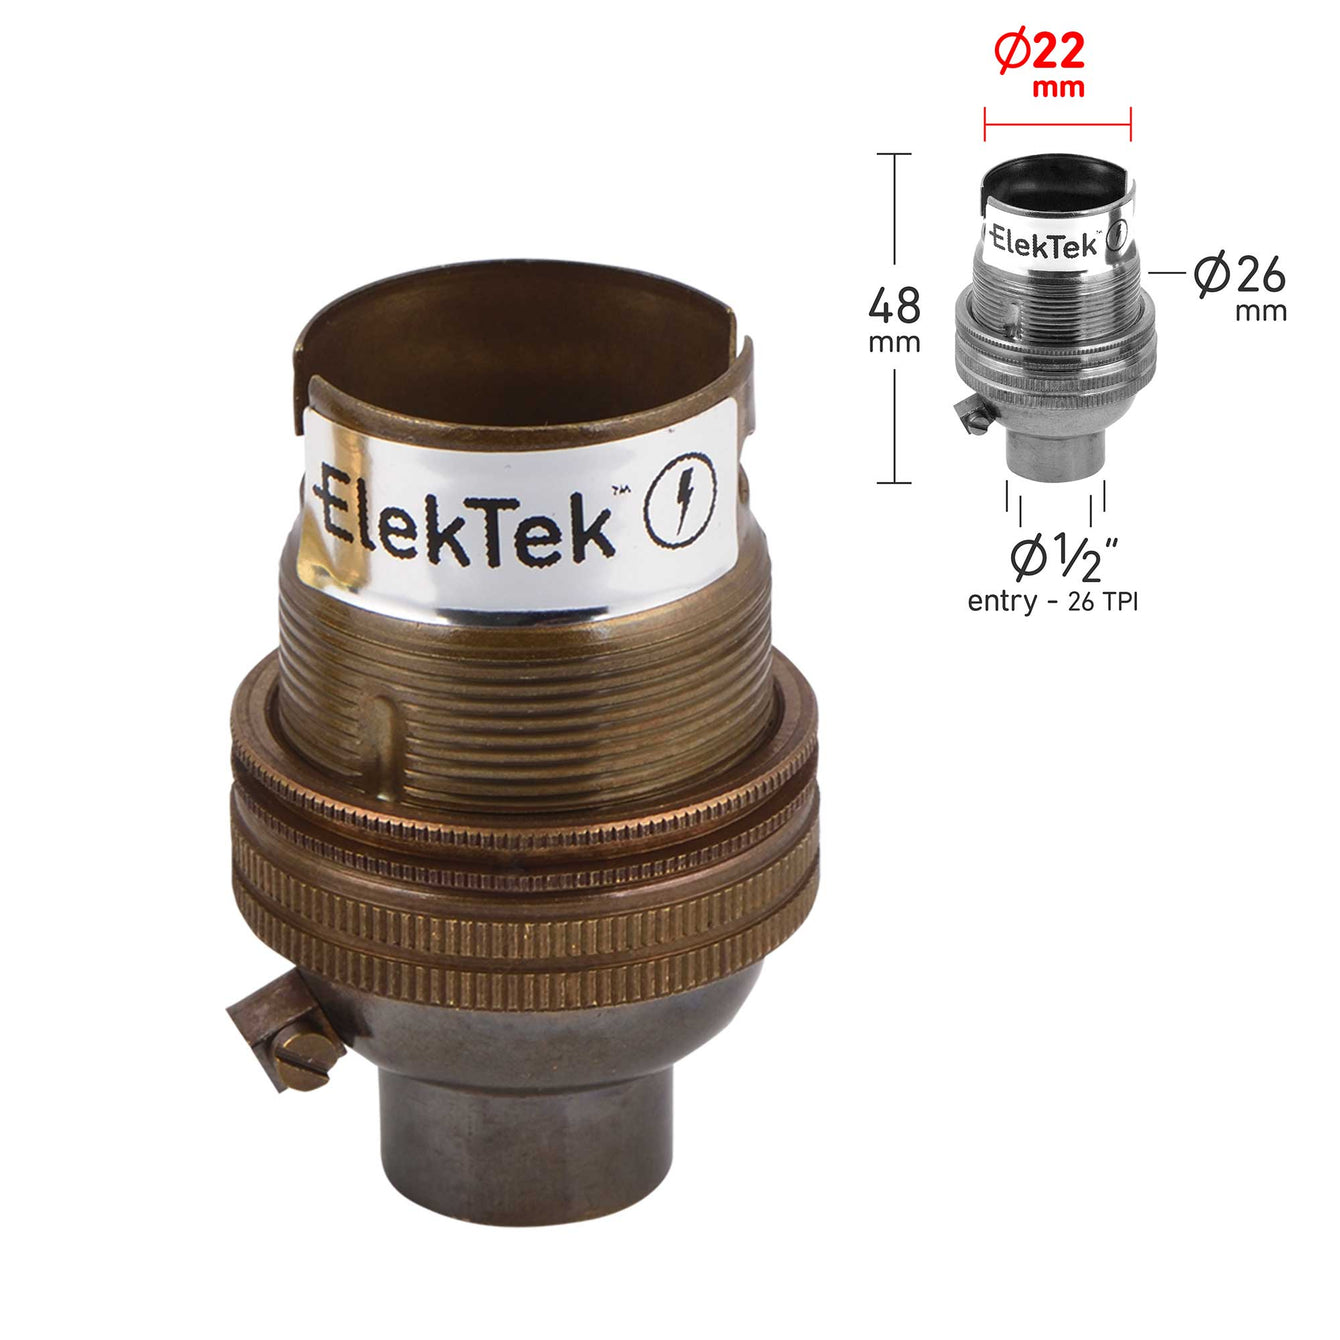 ElekTek Lamp Holder Bayonet Cap B22 Unswitched 10mm or Half Inch Entry With Shade Ring Solid Brass - Buy It Better 